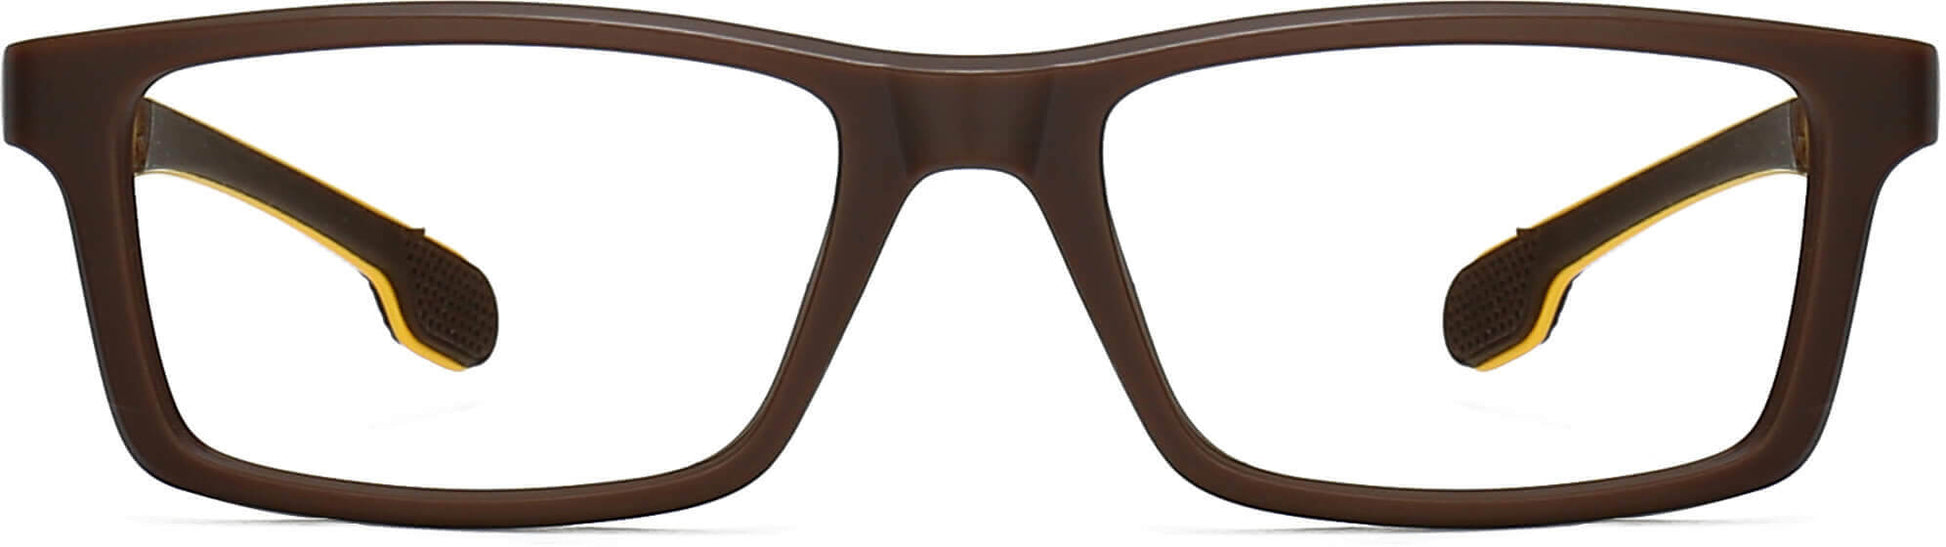 Myles Rectangle Brown Eyeglasses from ANRRI, front view